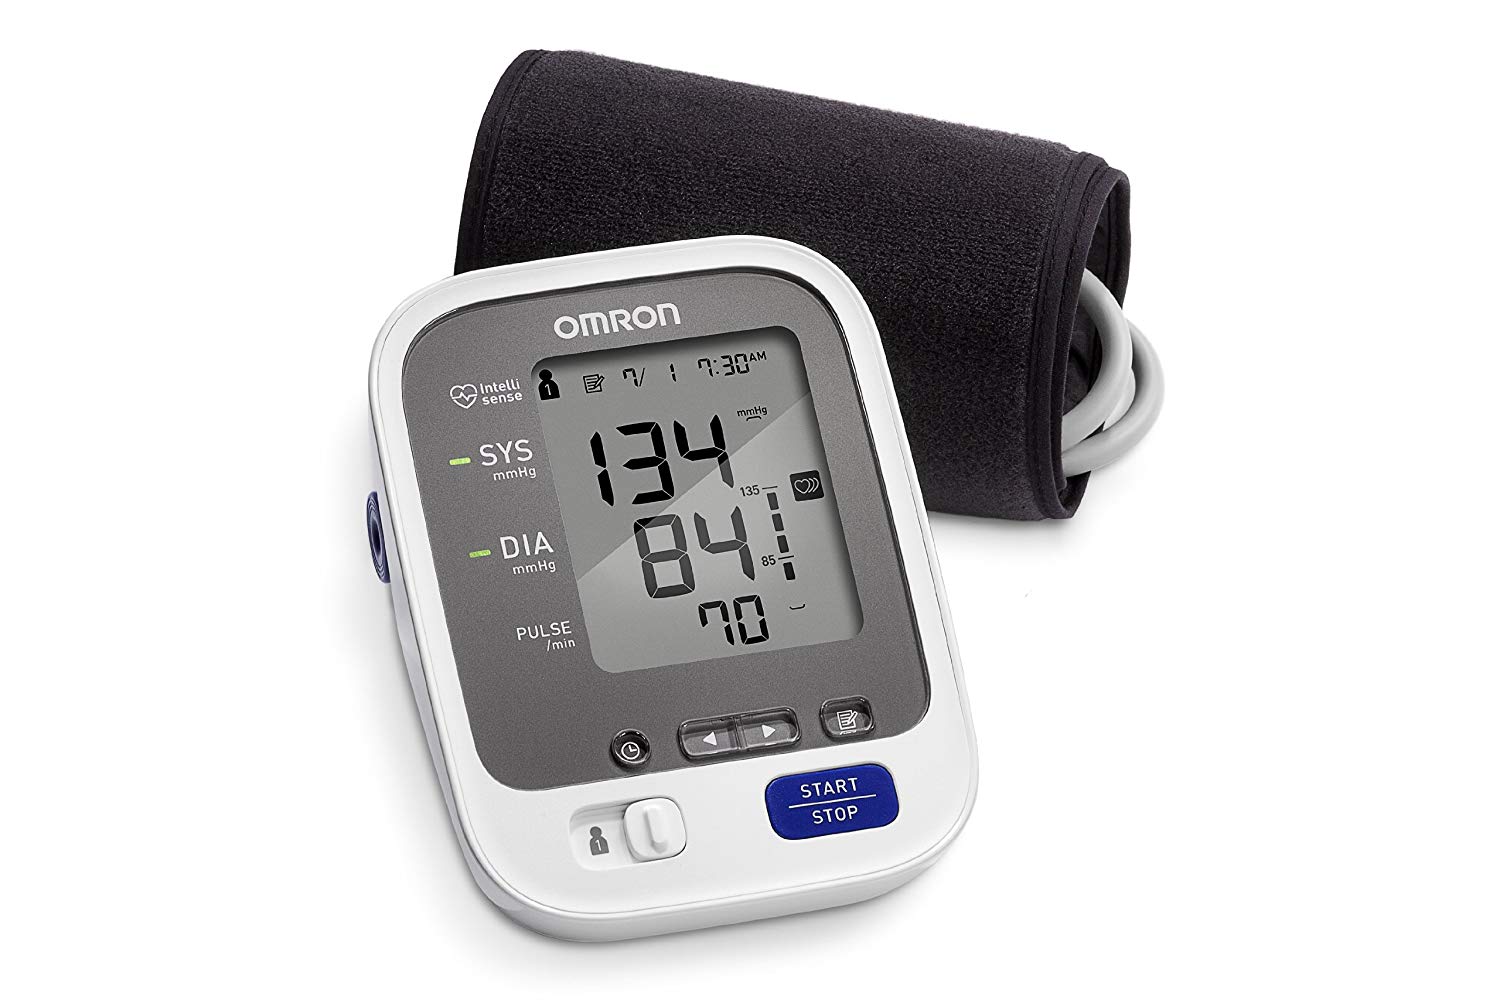 Best Omron BP Monitor for Home Use 2020 | Ten Reviewed [Reviews]